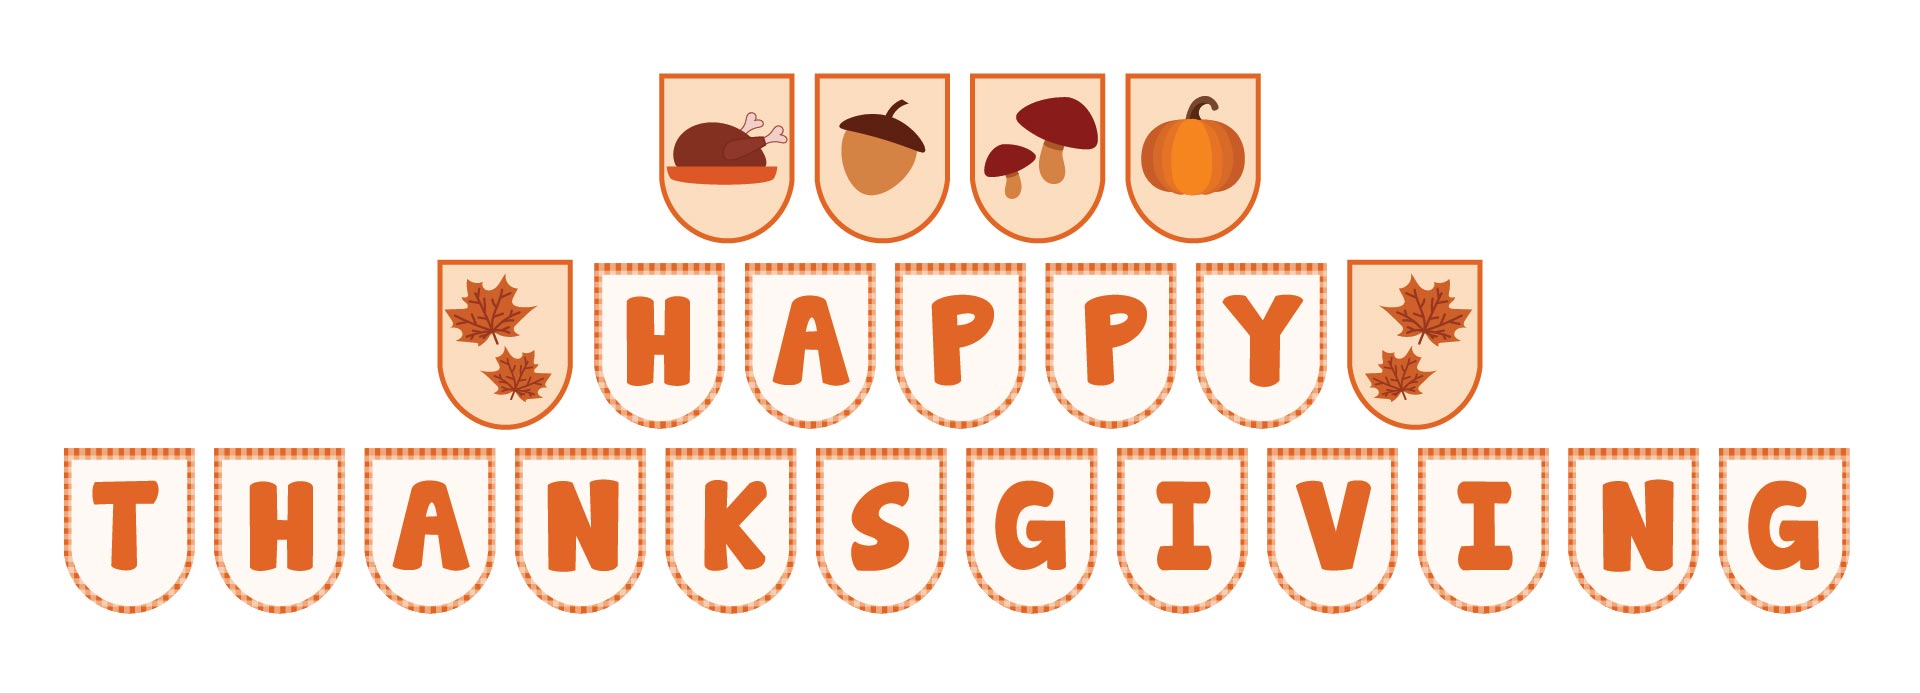 7-best-images-of-thanksgiving-banner-printable-free-printable